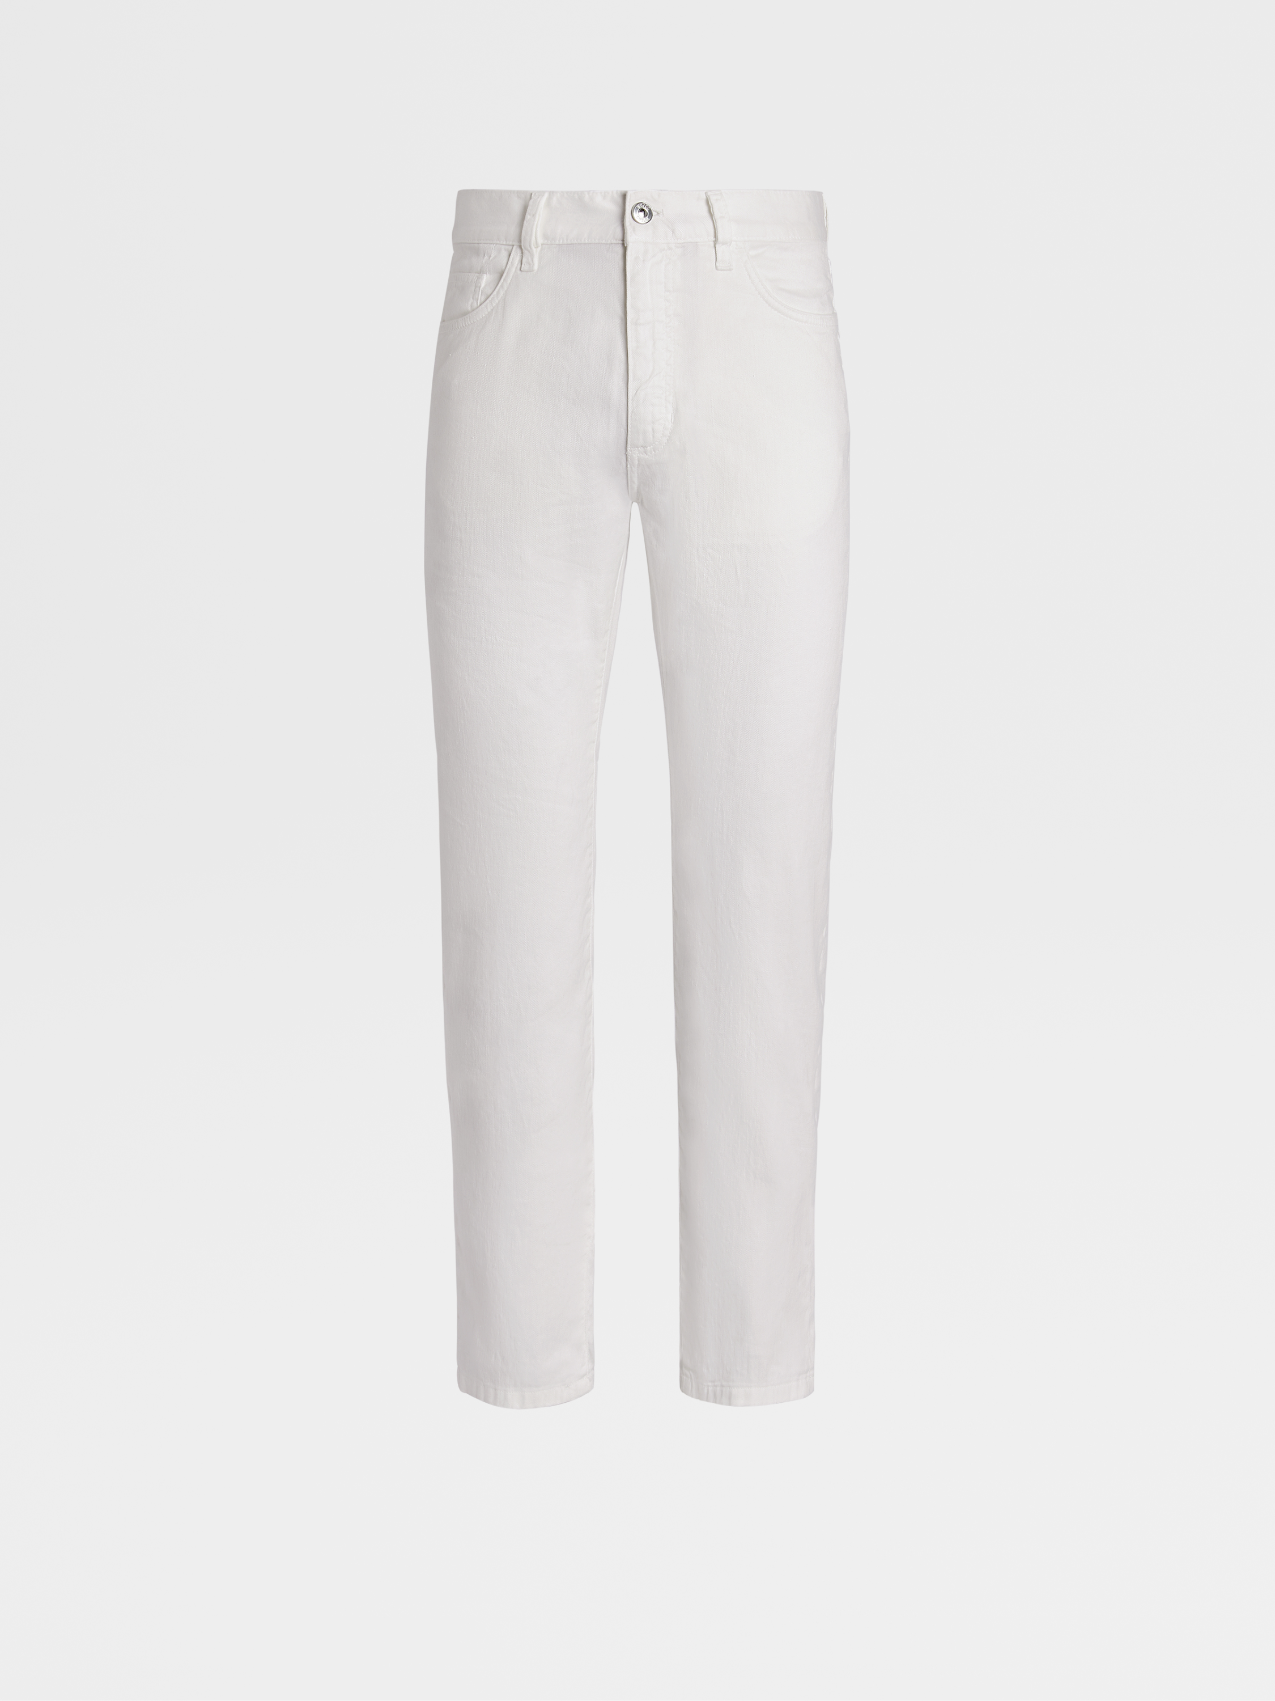 White Stretch Linen and Cotton Jeans